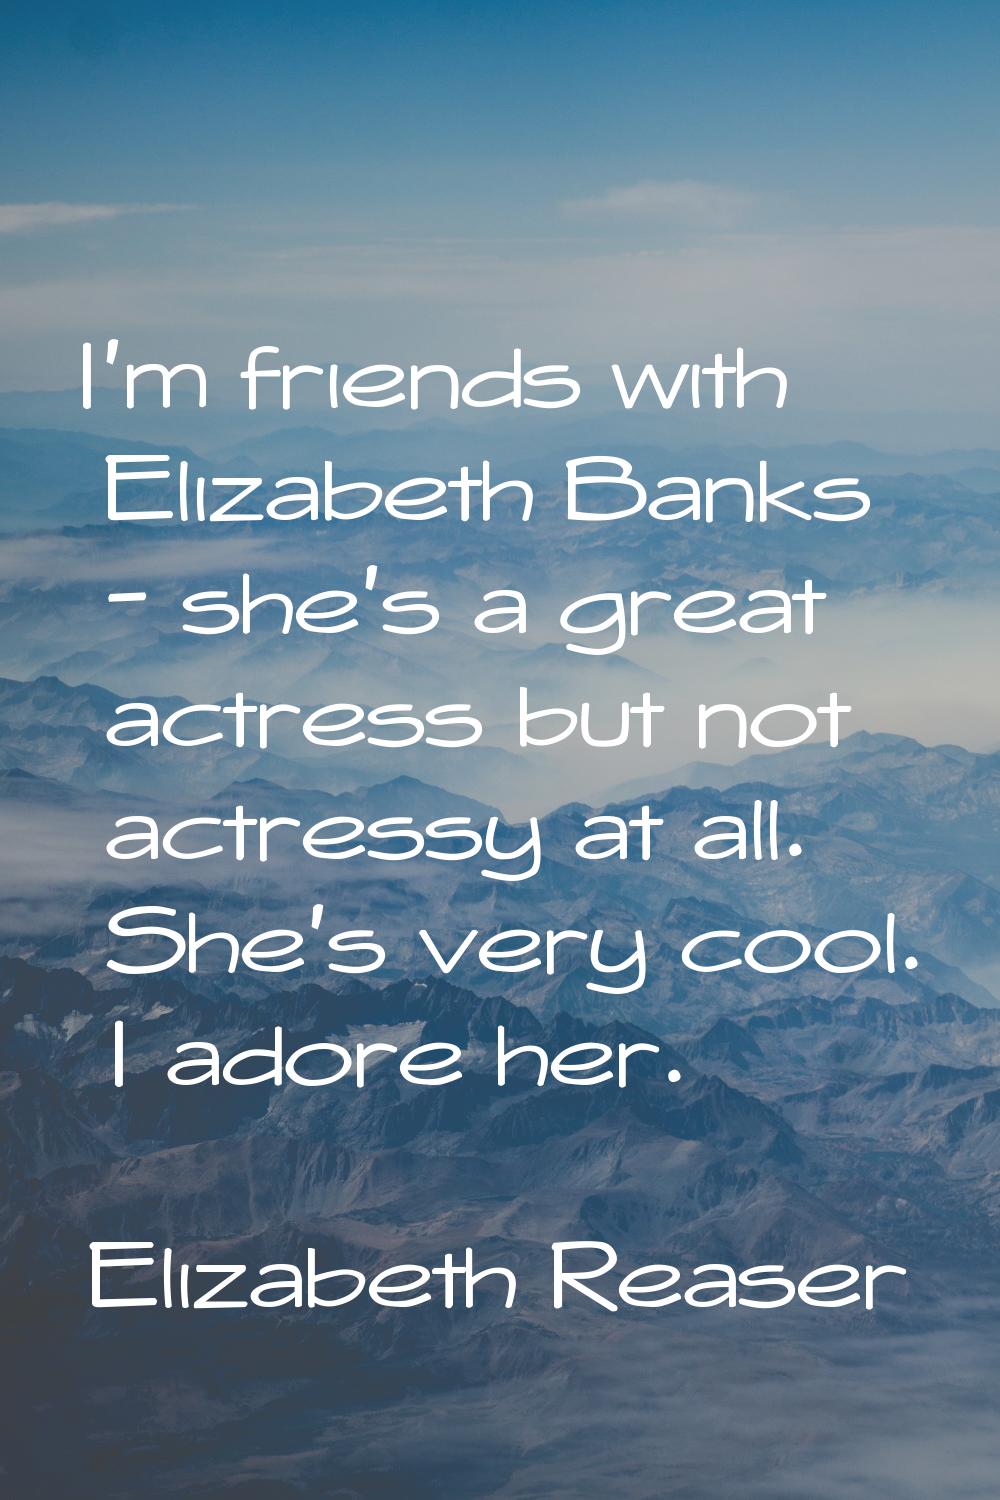 I'm friends with Elizabeth Banks - she's a great actress but not actressy at all. She's very cool. 